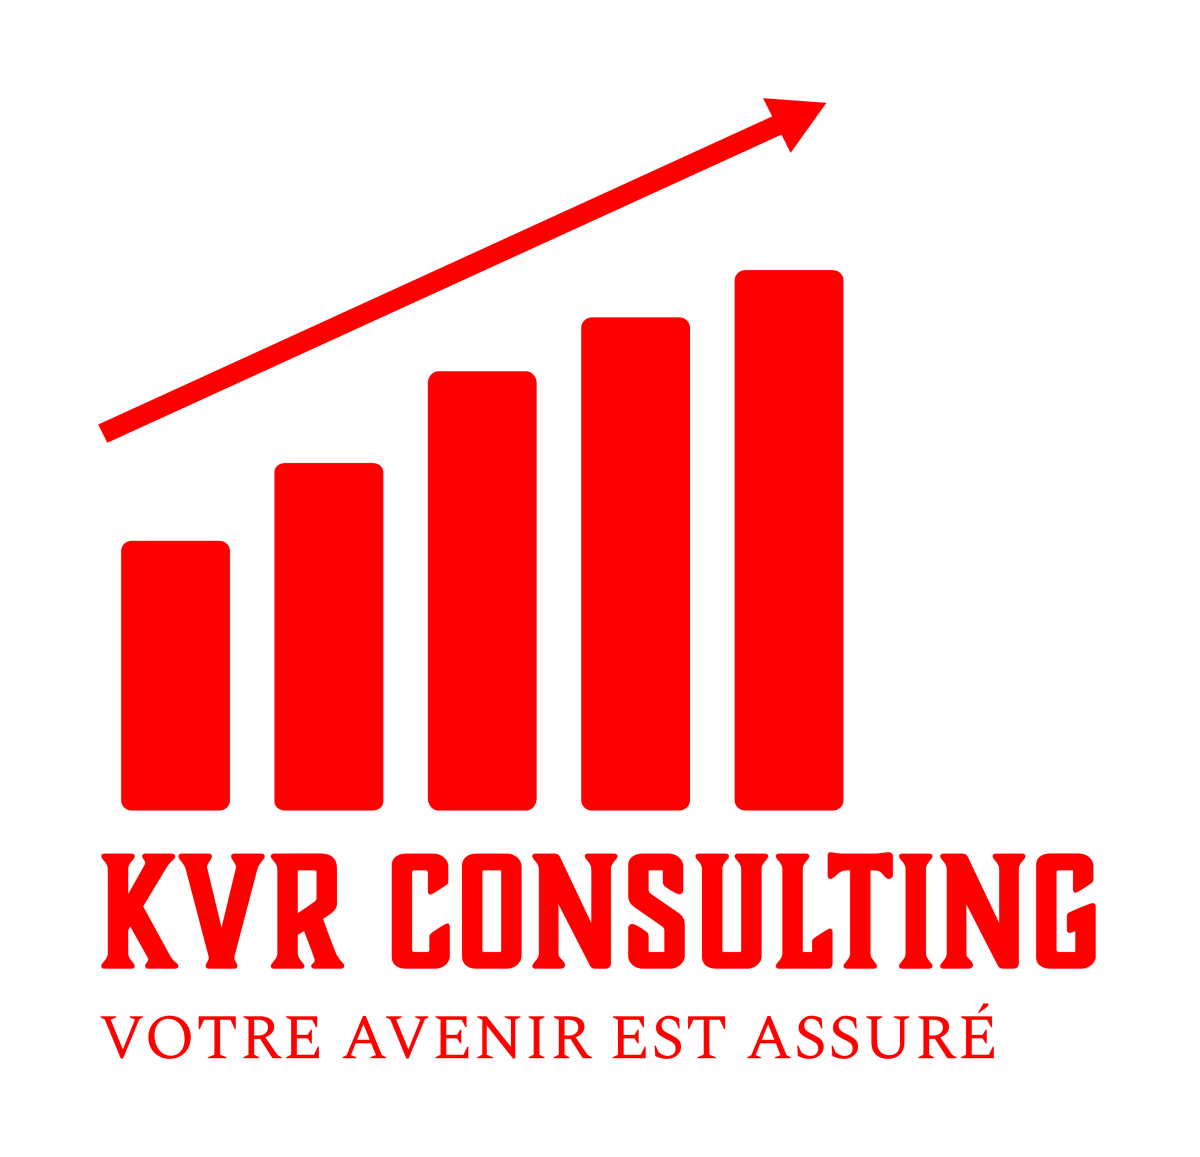 KVR CONSULTING